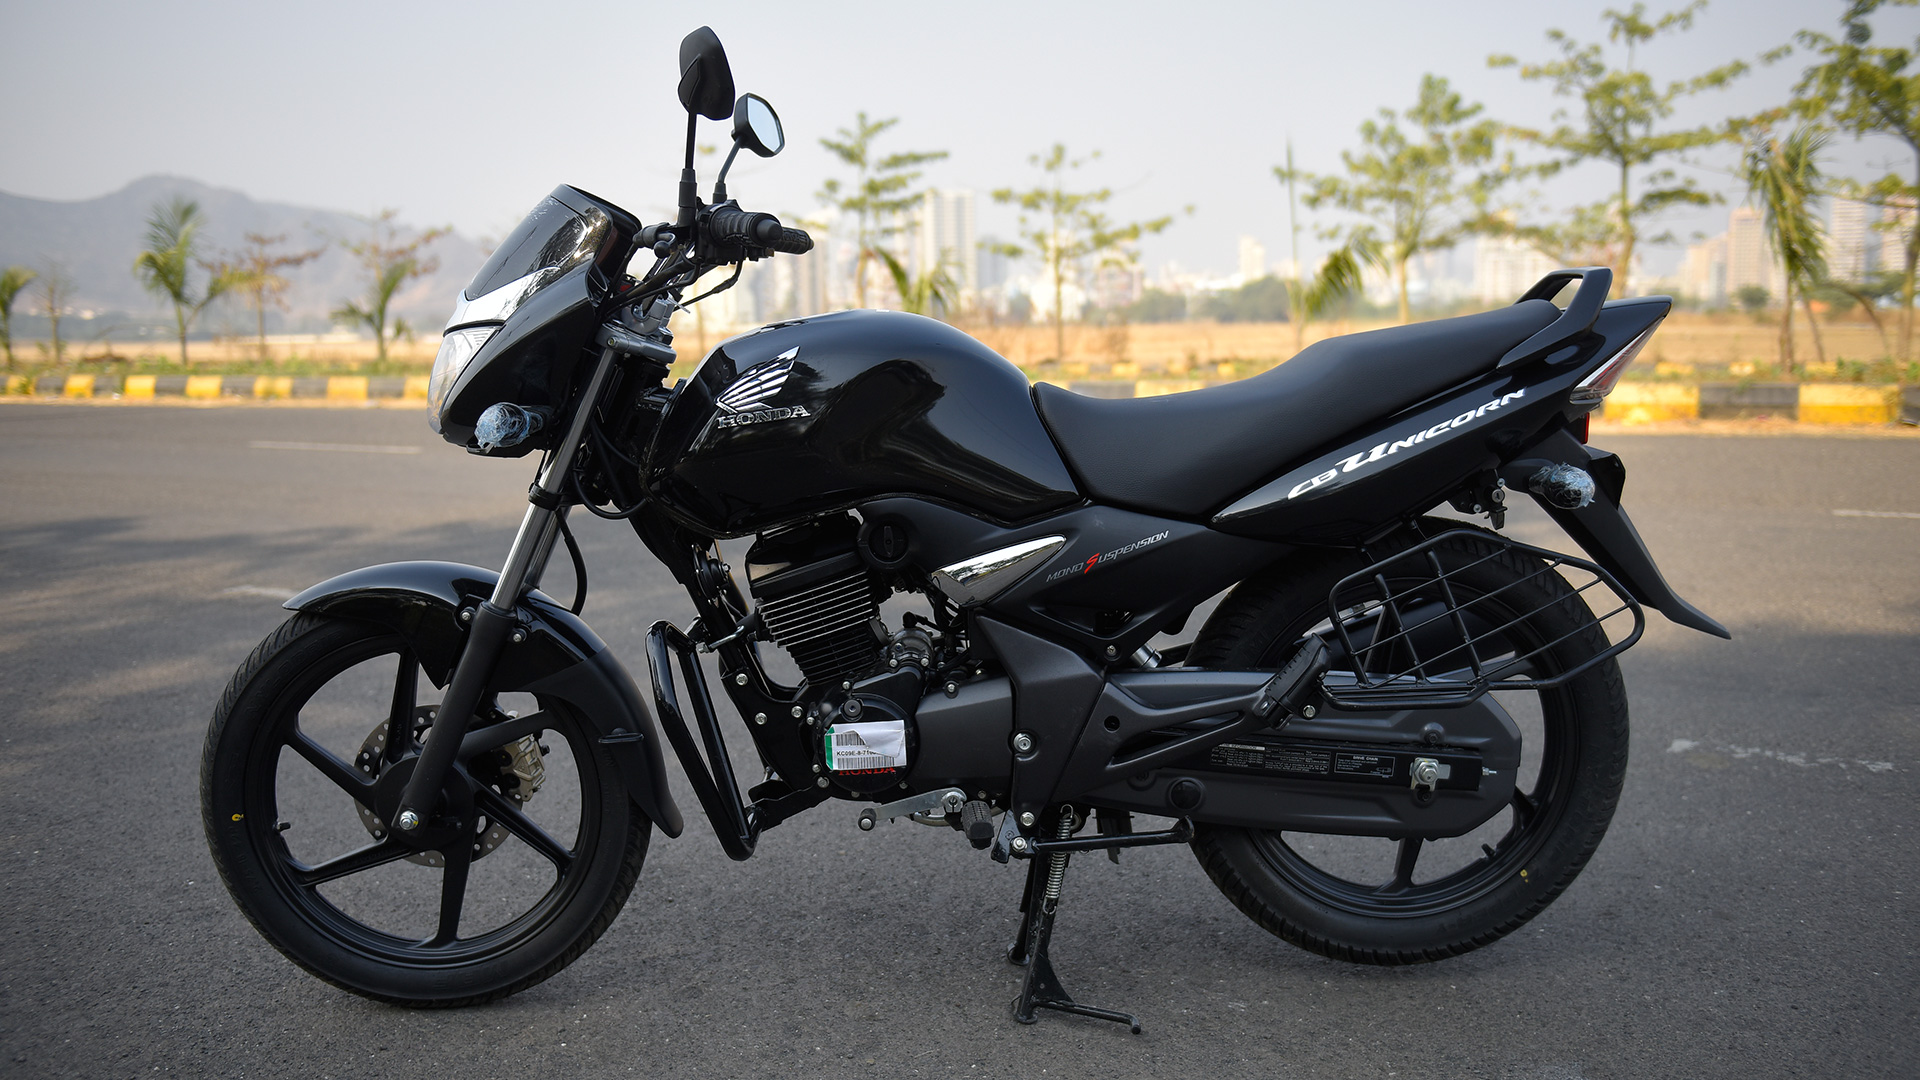 Honda Cb Unicorn 150 2019 Abs Price Mileage Reviews Specification Gallery Overdrive